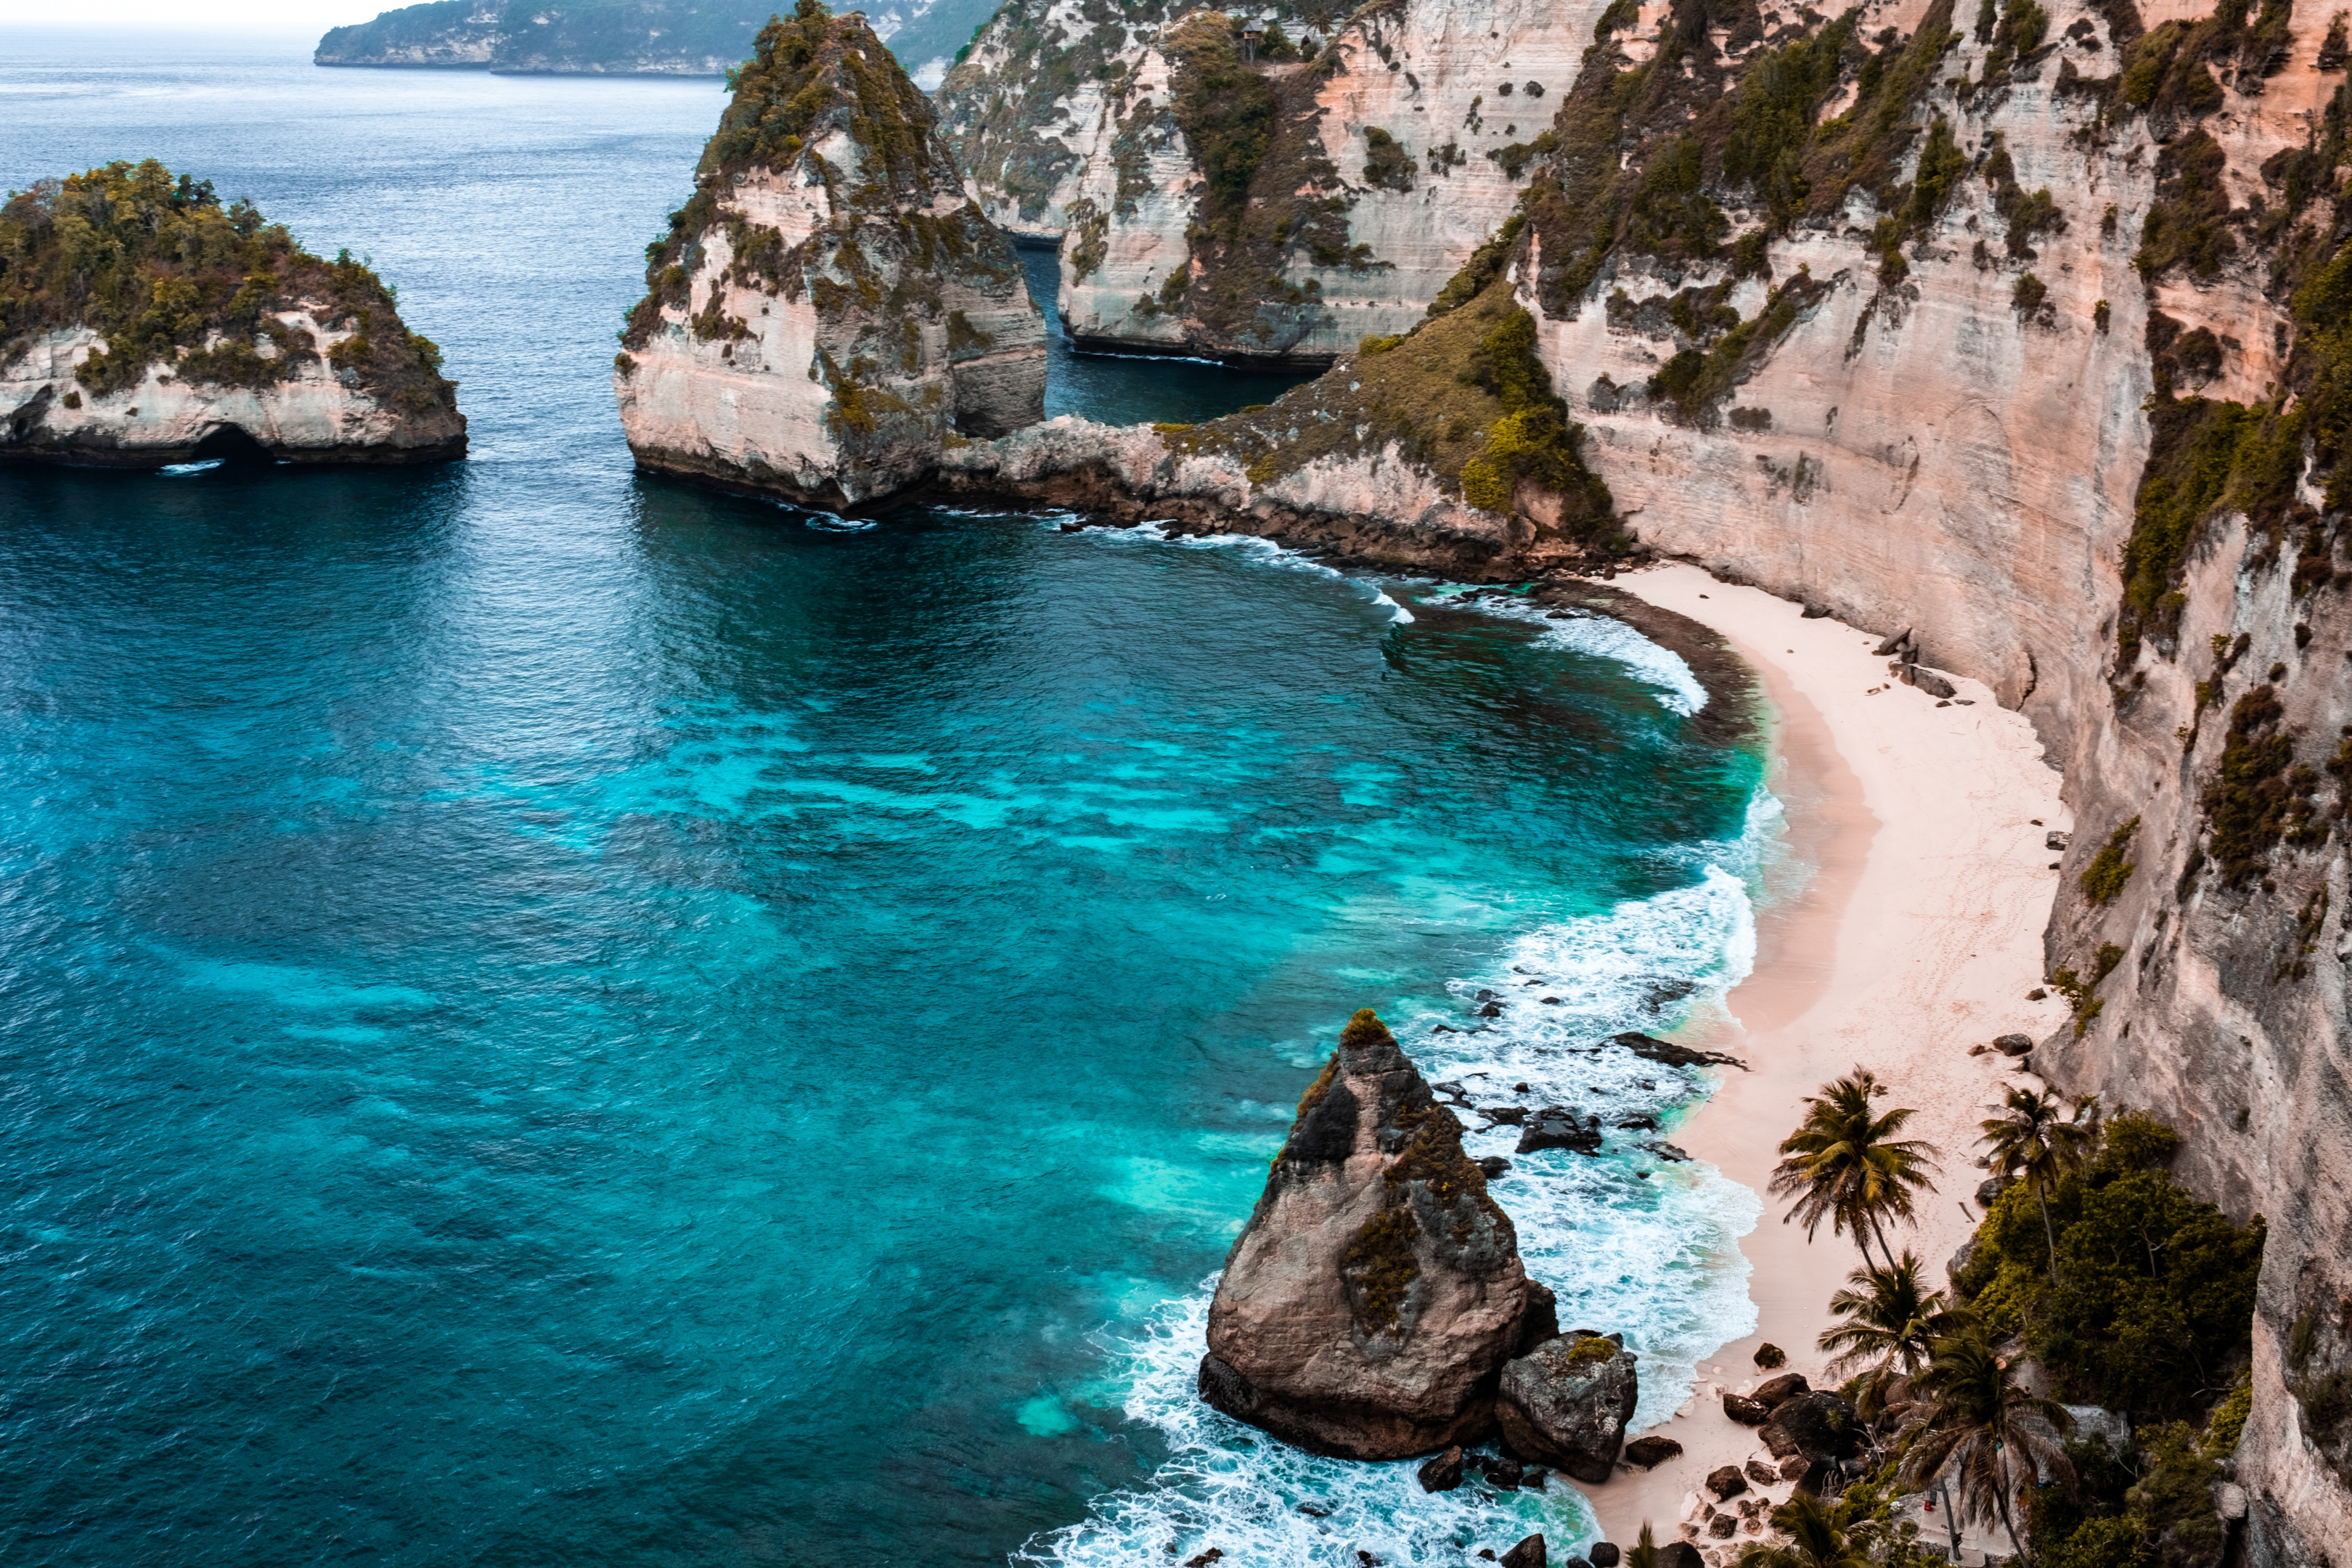 Bali is known for its amazing beaches | Photo by Timur Kozmenko from Pexels